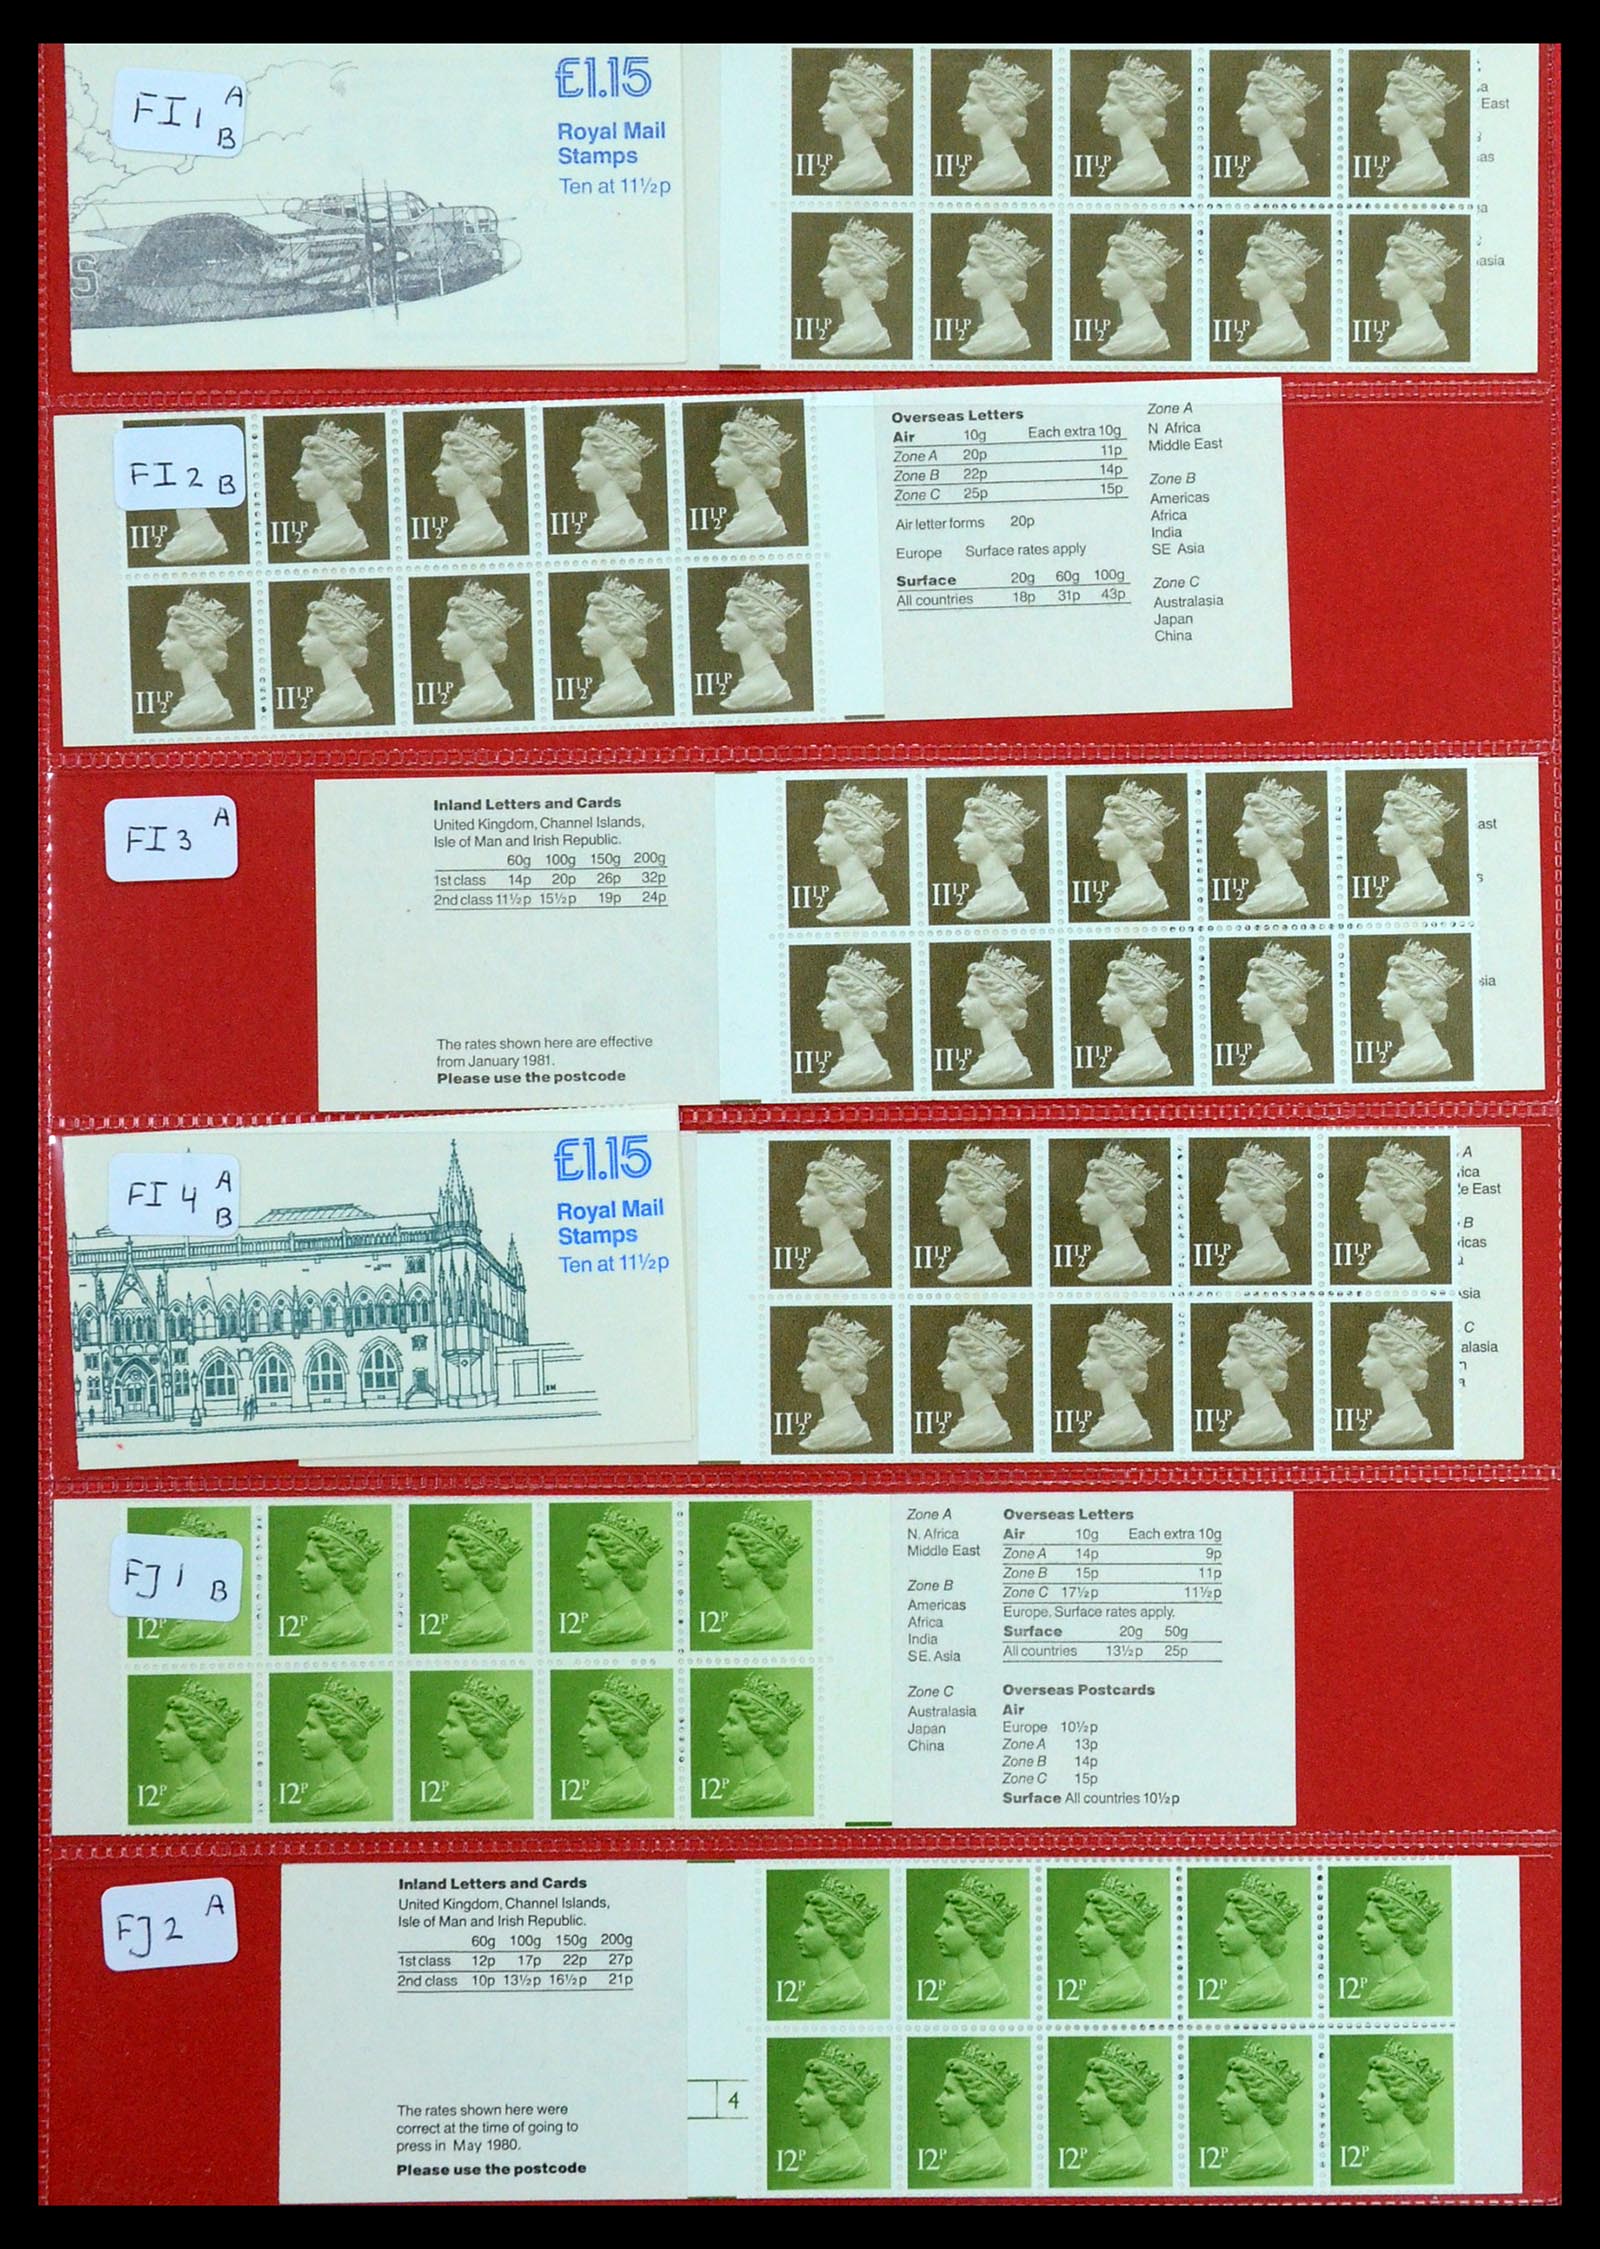 36368 017 - Stamp collection 36368 Great Britain stamp booklets 1976-2000.